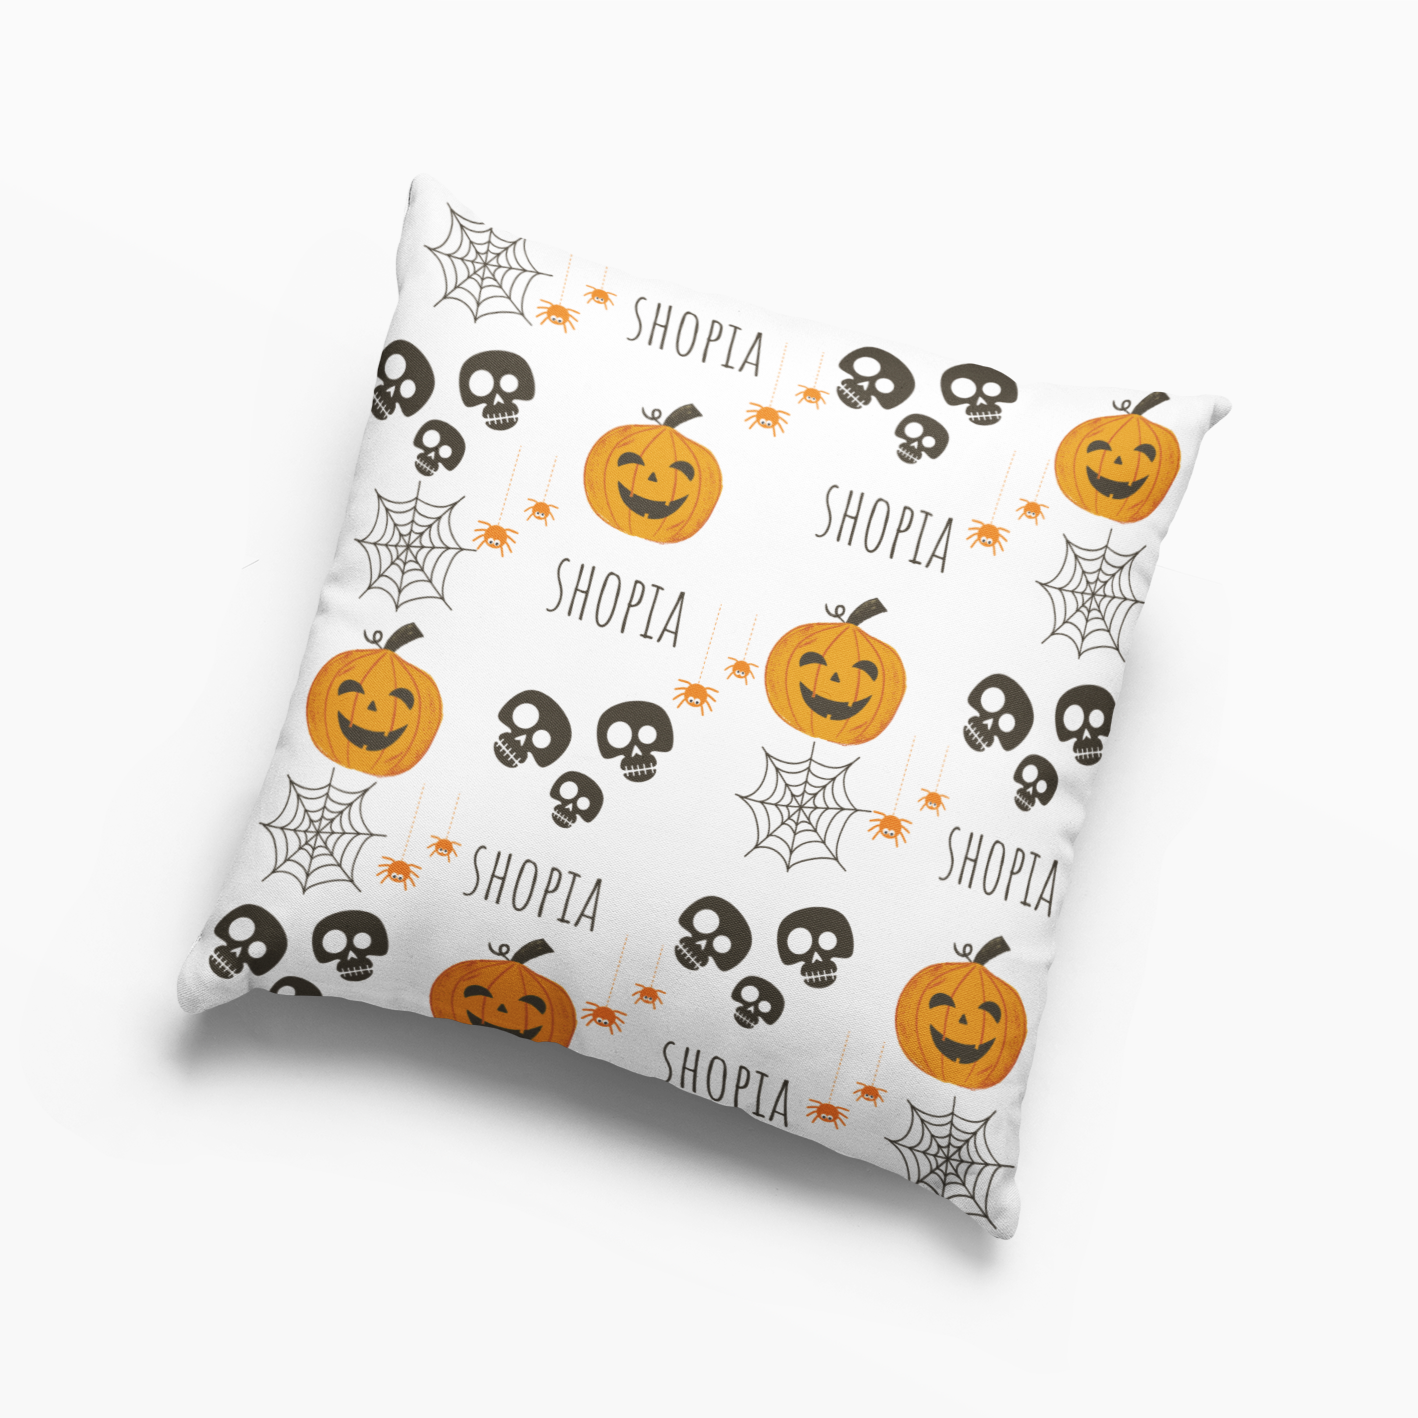 Personalized Halloween Pillow with Your name #1 Pillow Case Halloween Gift for Kids